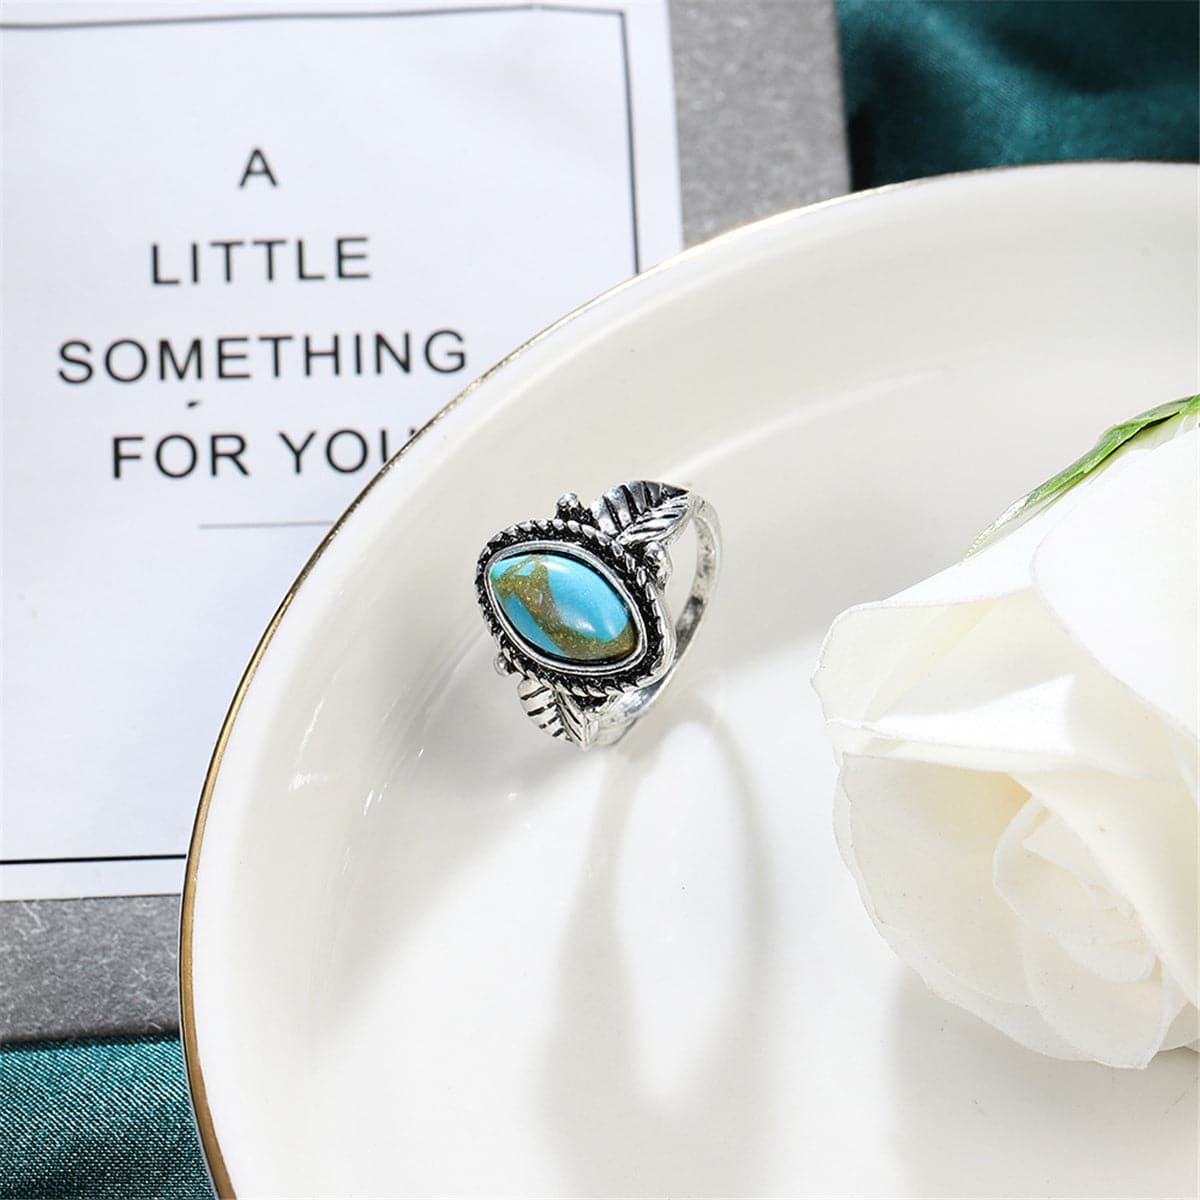 Turquoise & Silver-Plated Leaf Ring